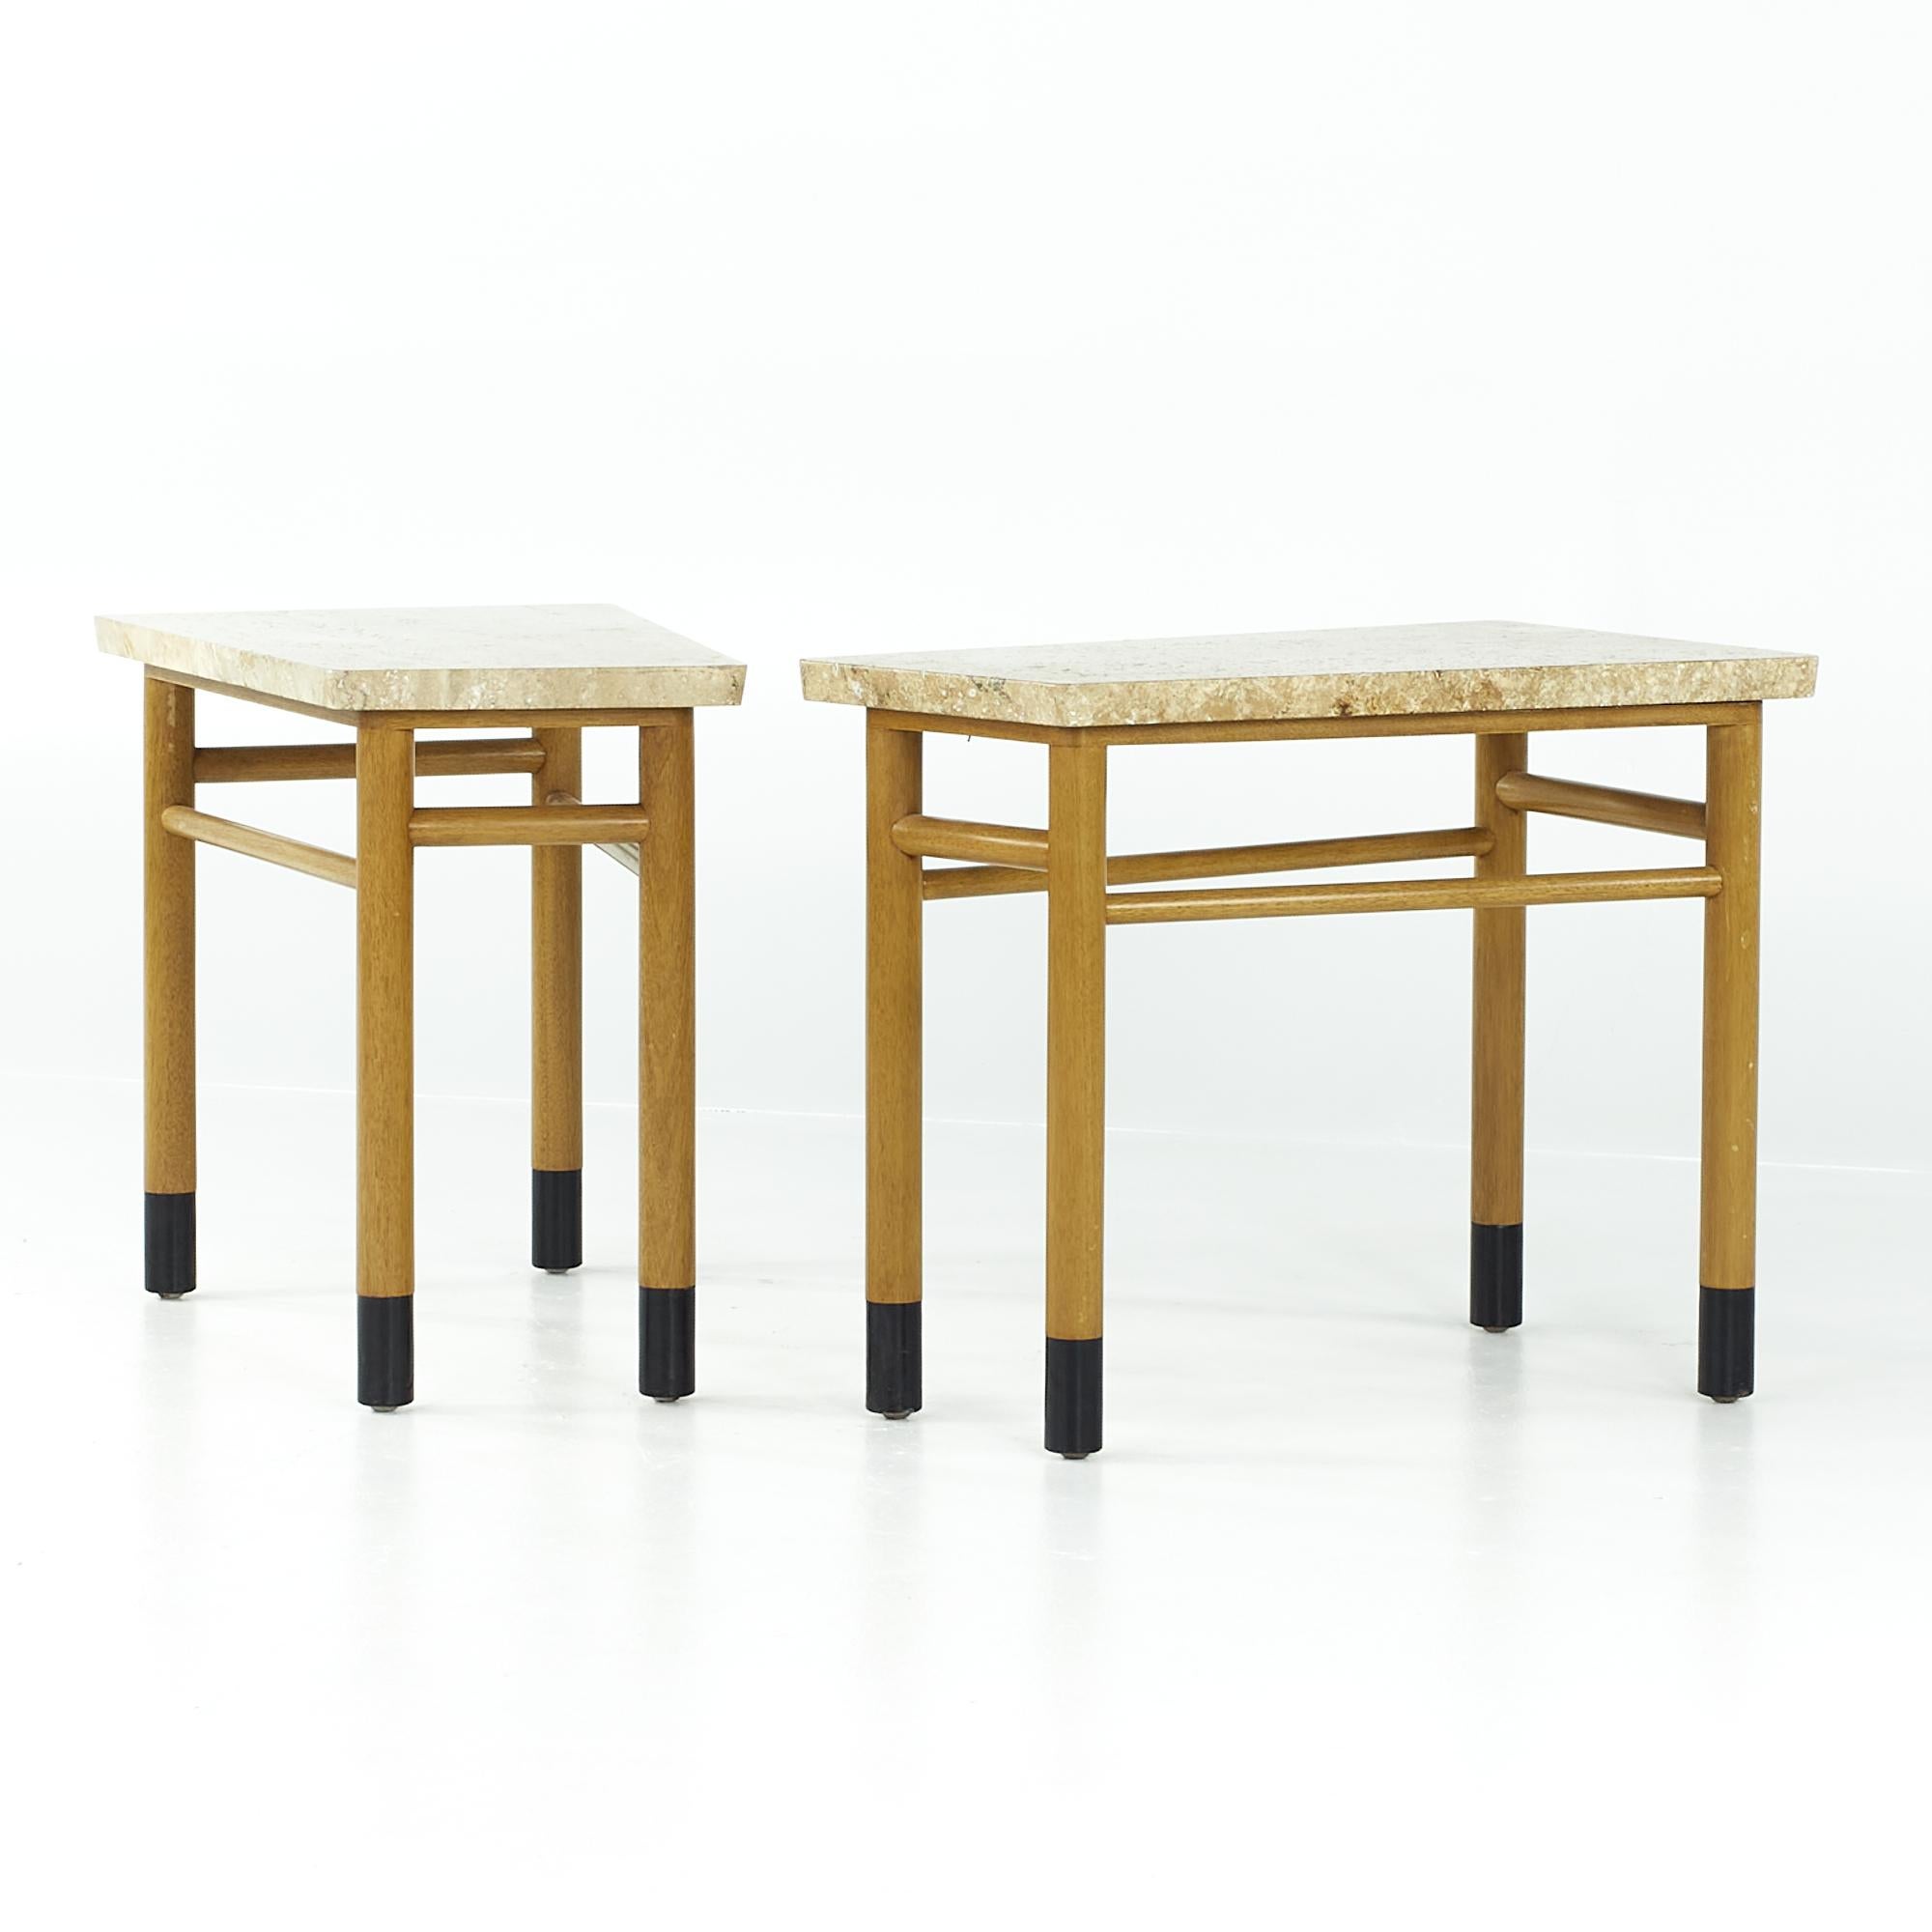 Mid-Century Modern Edward Wormley for Dunbar Midcentury Travertine Wedge Tables, Pair For Sale